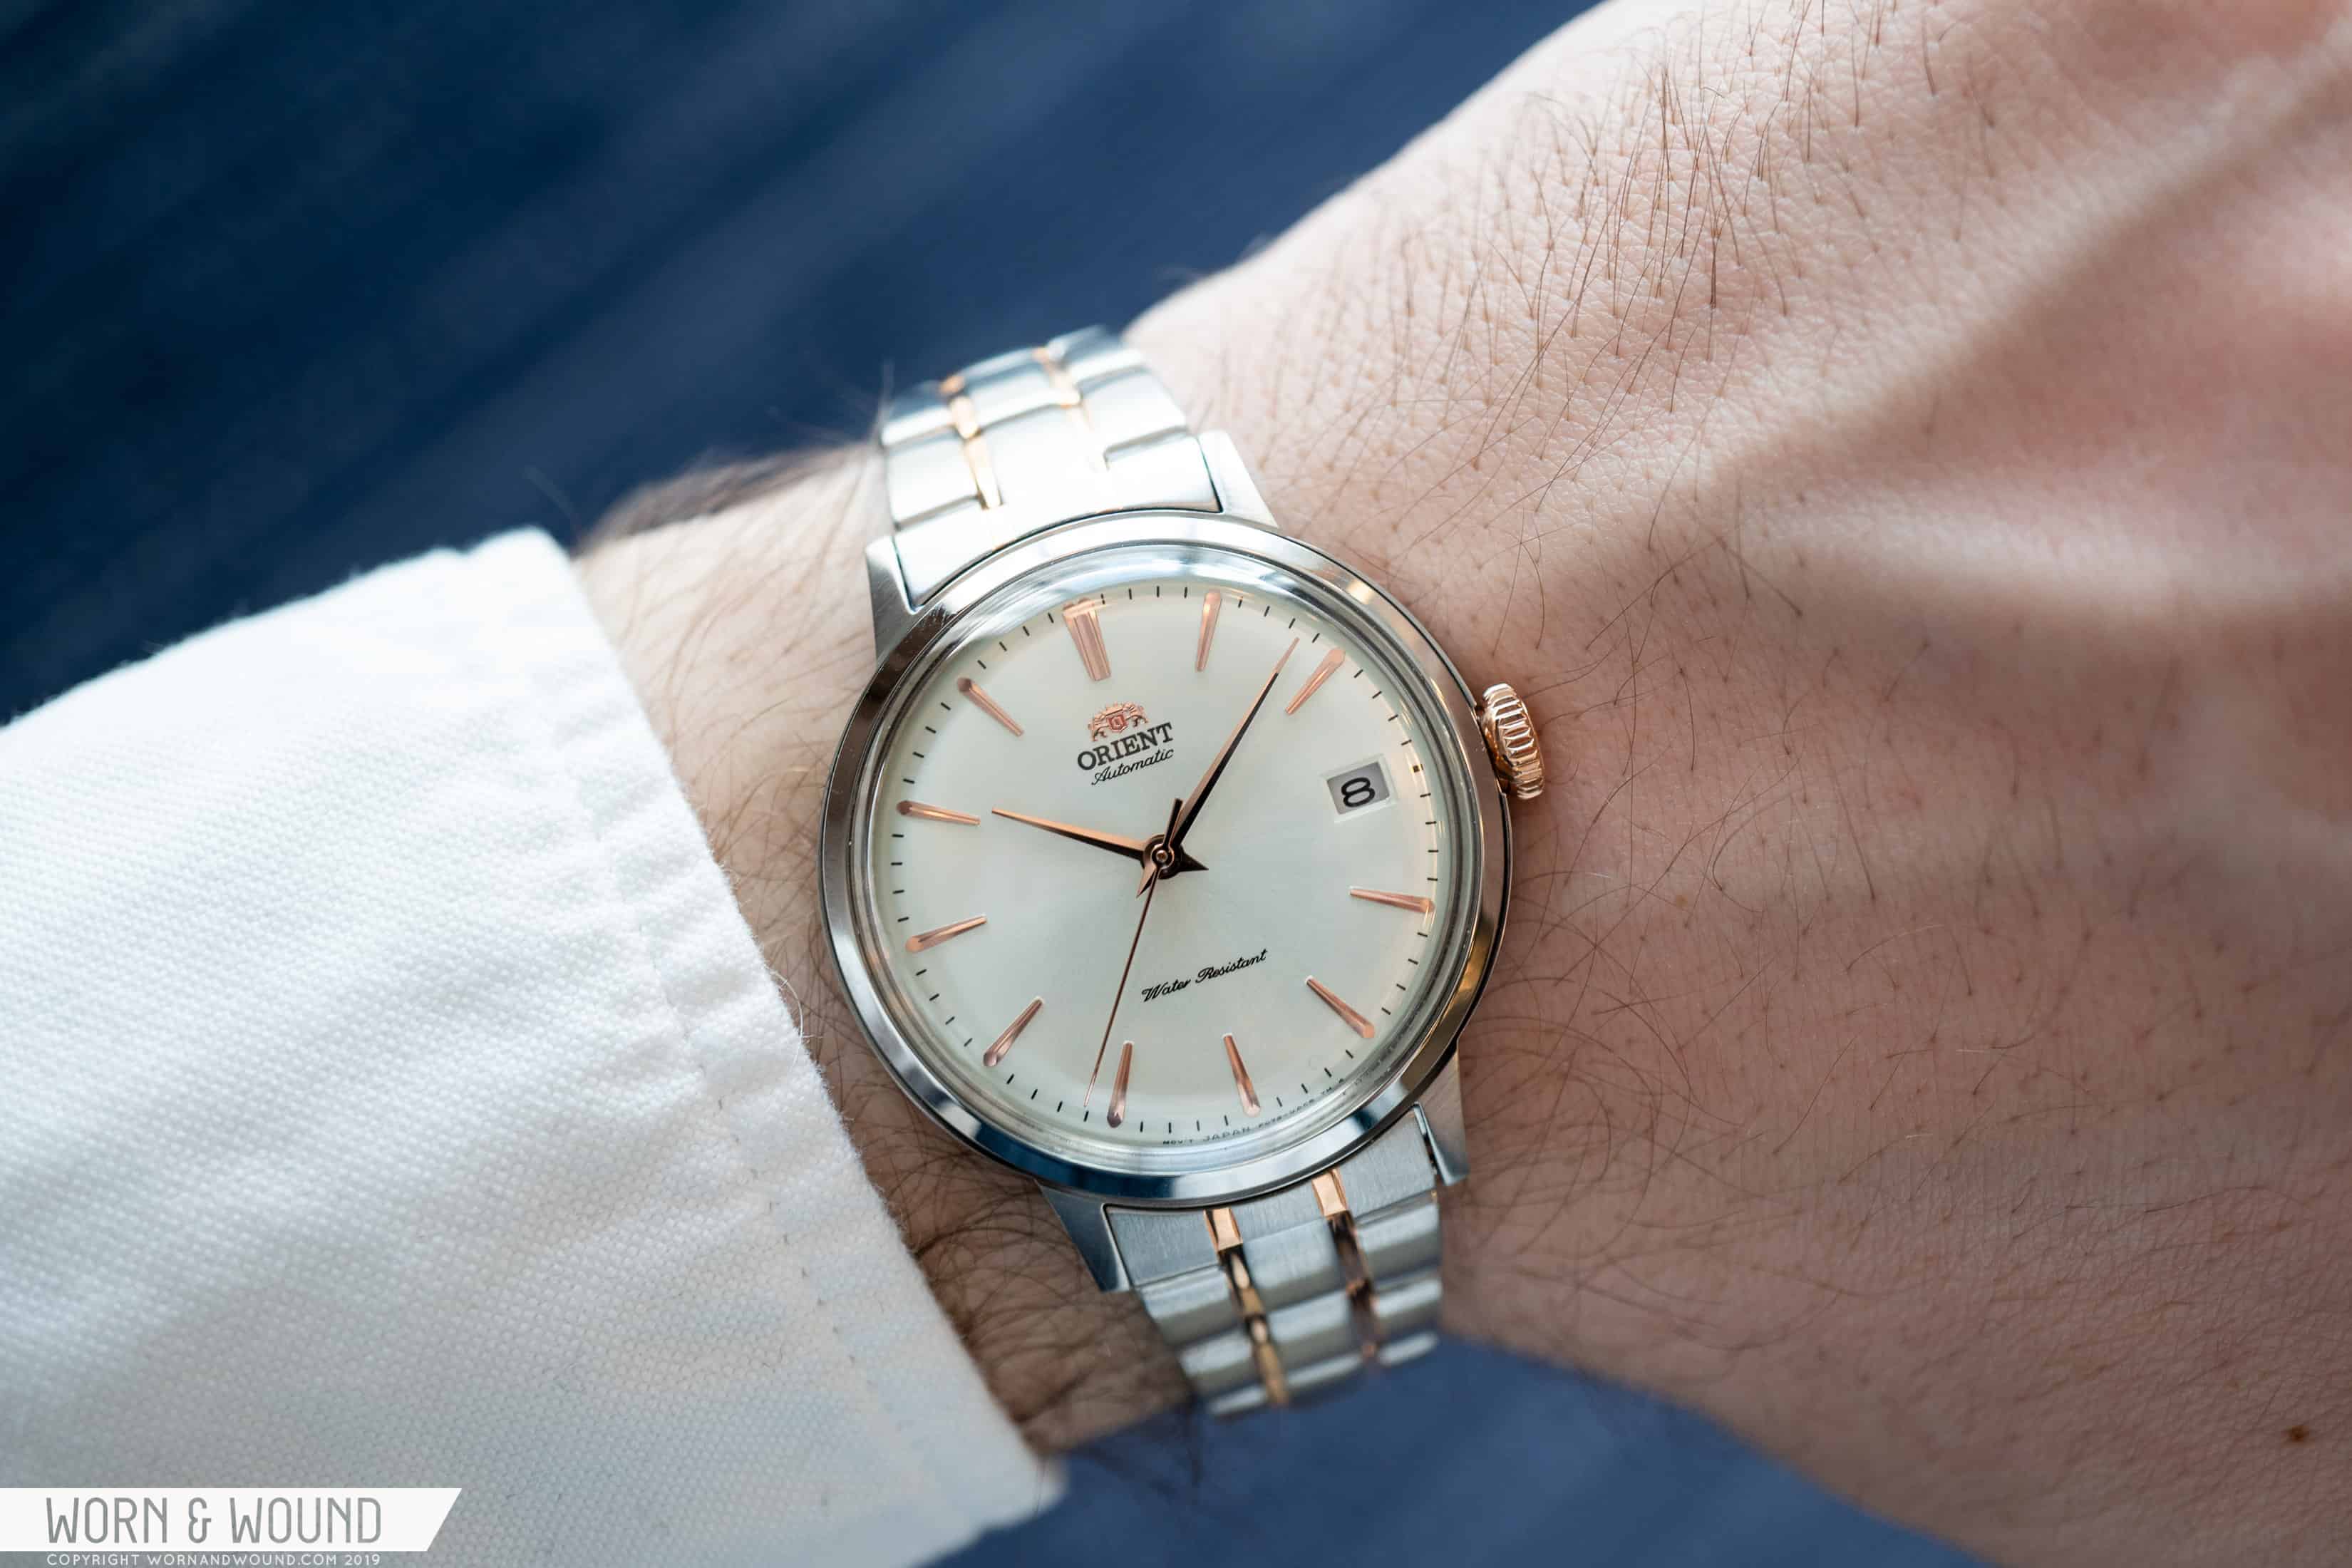 Baselworld 2019: First Look at the New 36mm Classic Date “Bambino” From Orient